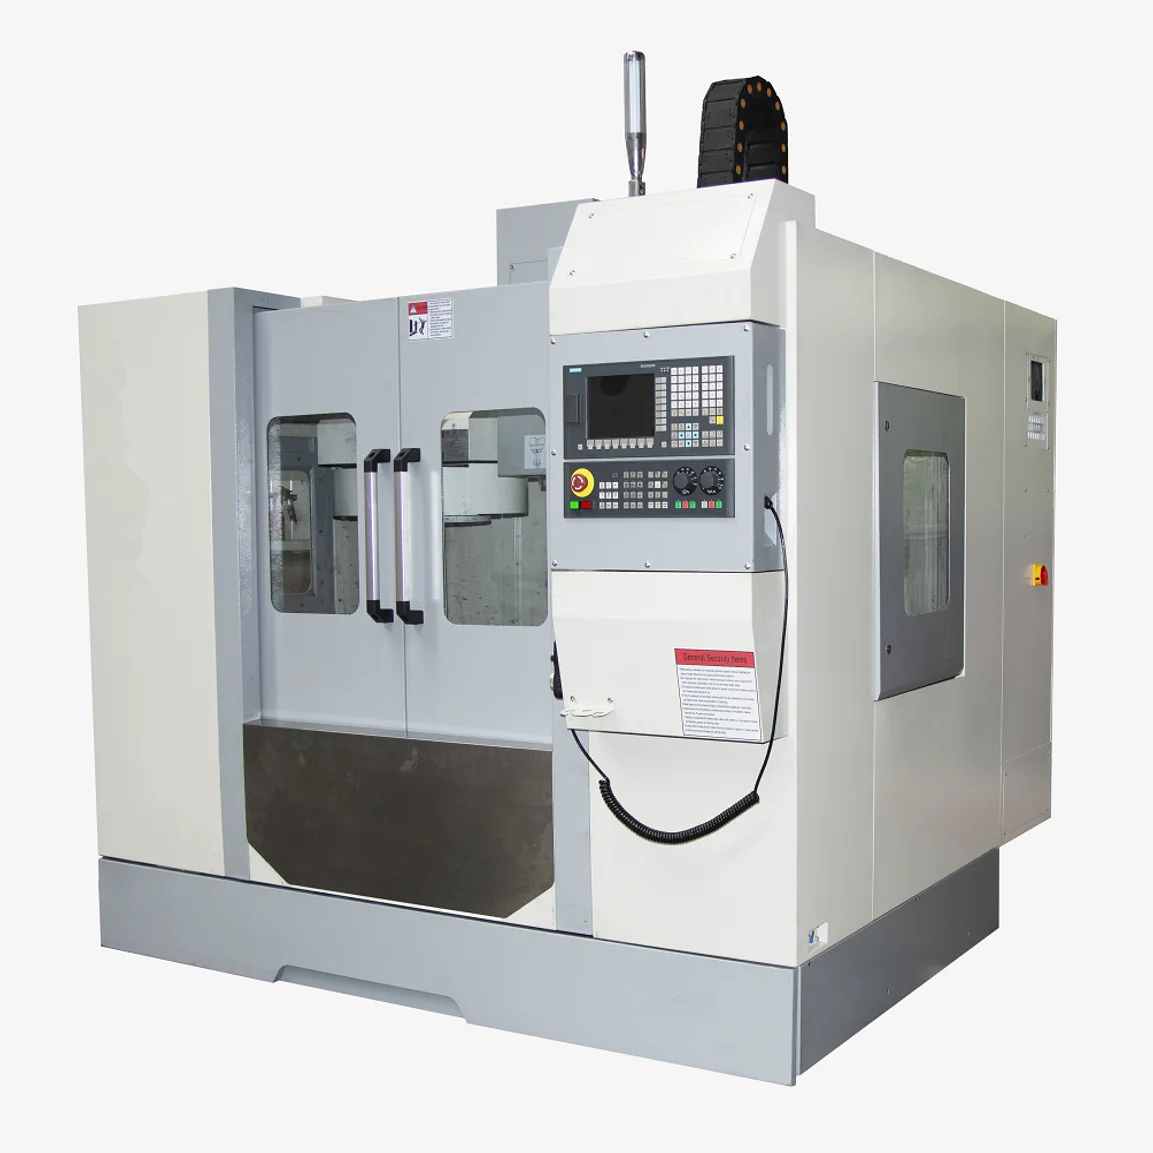 Sumore CHINA SMC650 cheap price good condition small VMC model CNC Machining center 4th Axis available for wholesale (1600540216657)